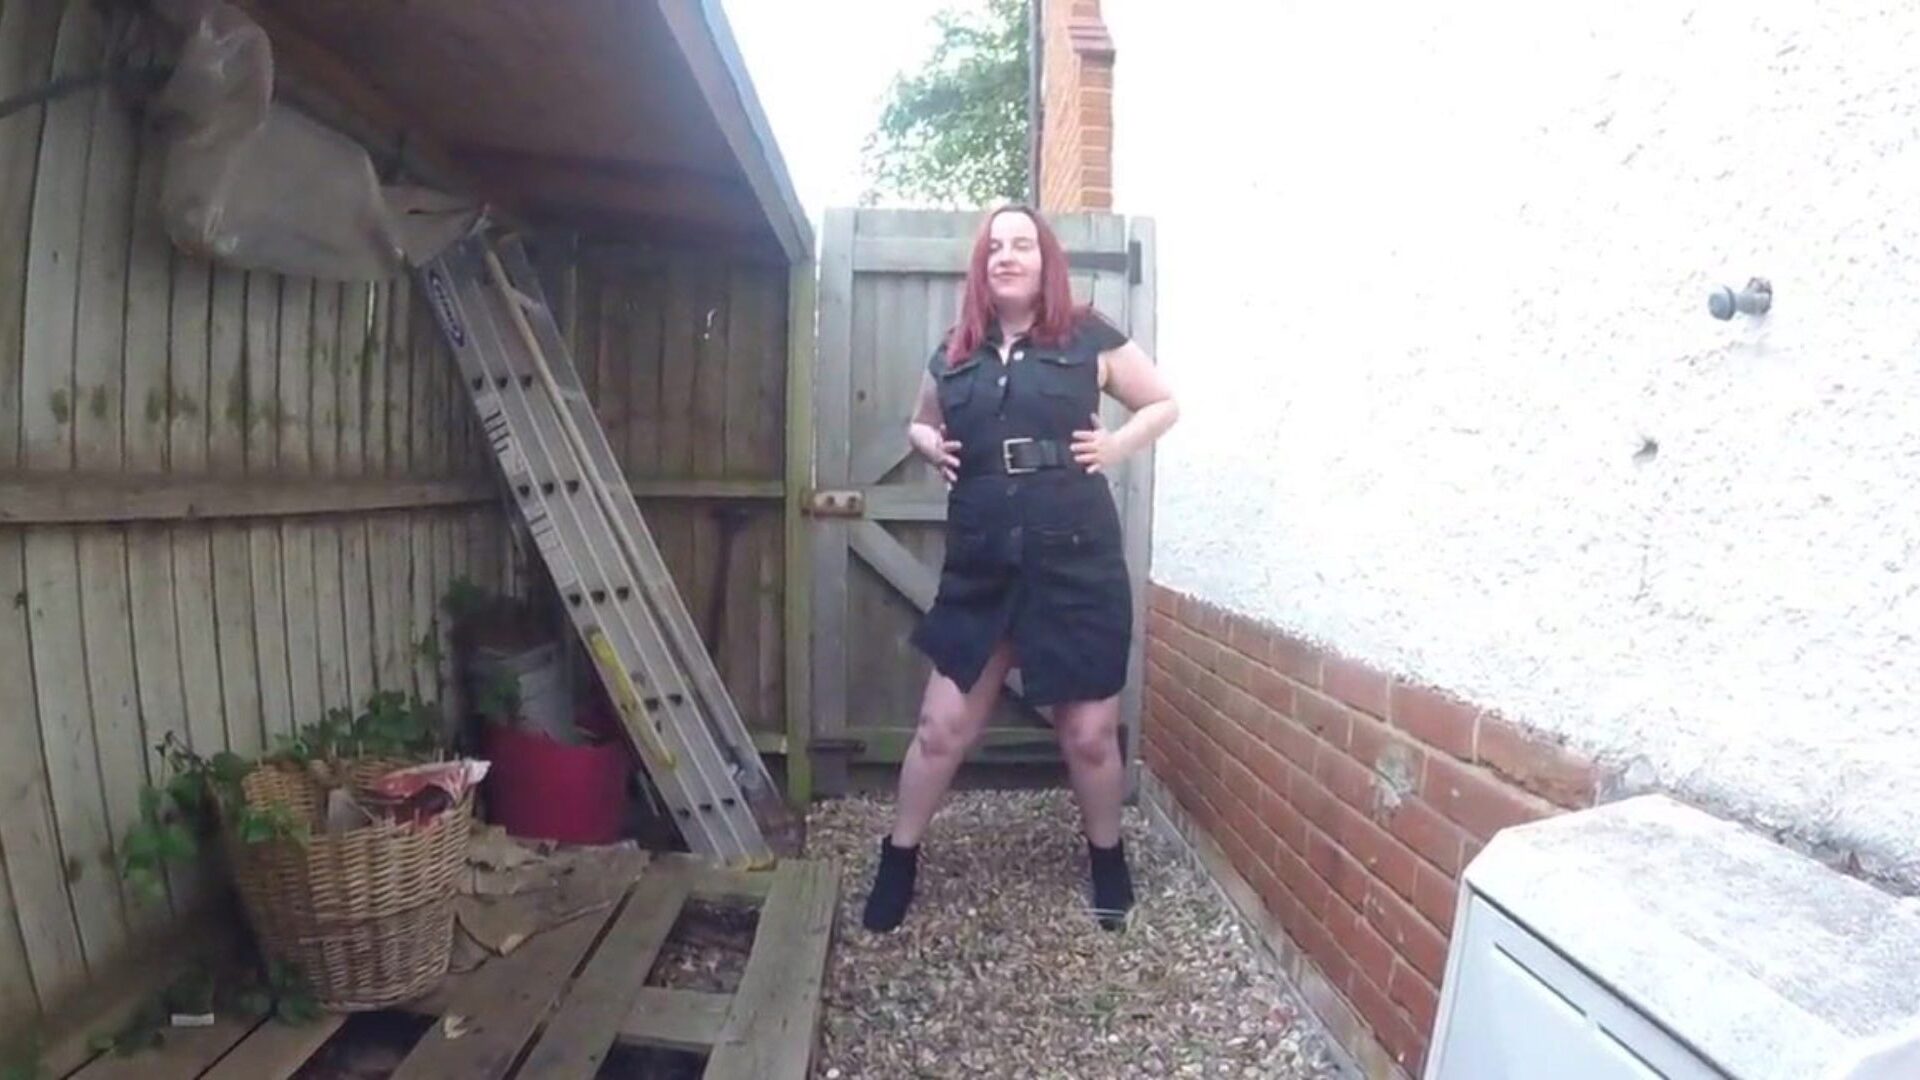 Sexy Black Button Down Dress in the Yard, Porn 91: xHamster Watch Sexy Black Button Down Dress in the Yard movie scene on xHamster, the finest HD lovemaking tube web page with tons of free-for-all British Xxx Black & Sexy Twitter porn episodes